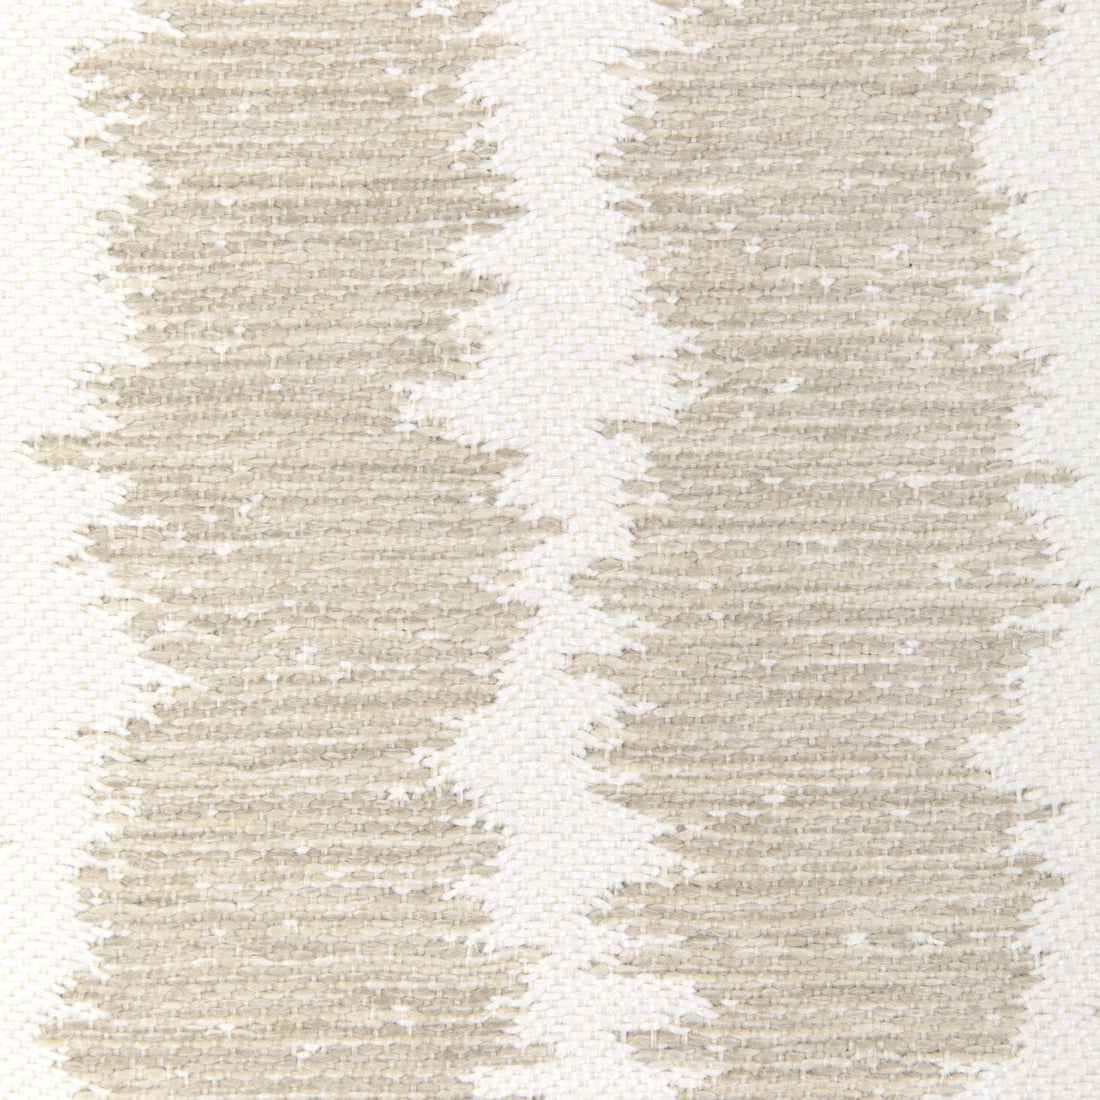 Closeup detail view of Seaport Stripe fabric in sand color - pattern 36917.16.0 - by Kravet Couture in the Riviera collection